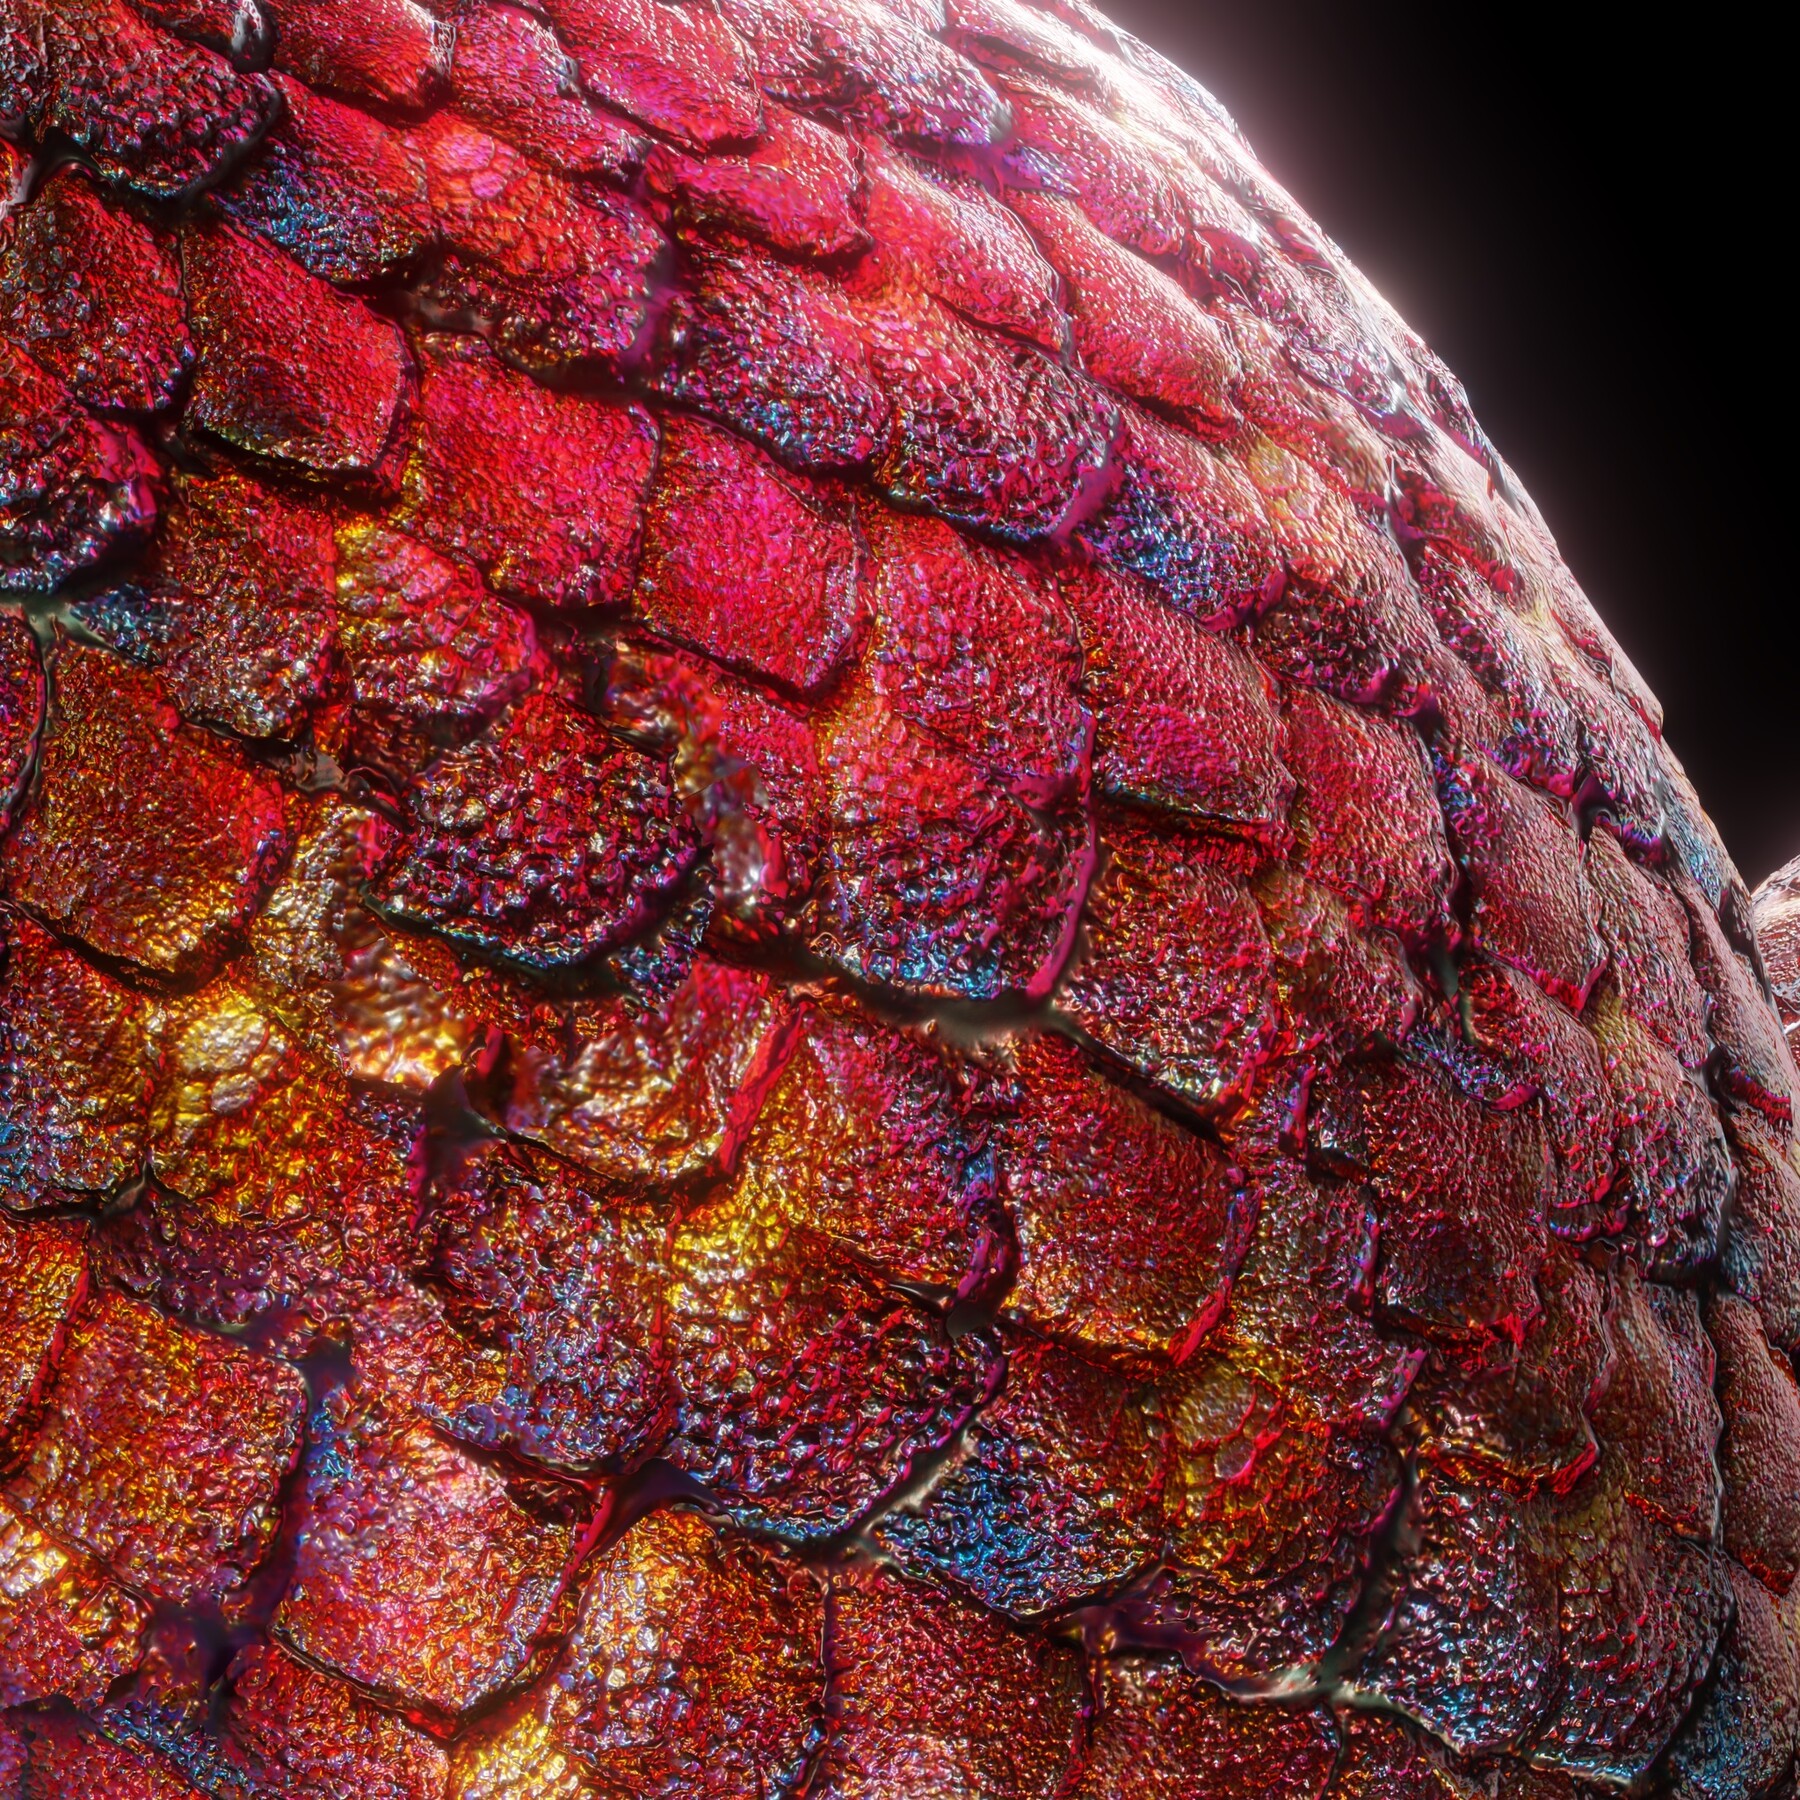 red dragon texture